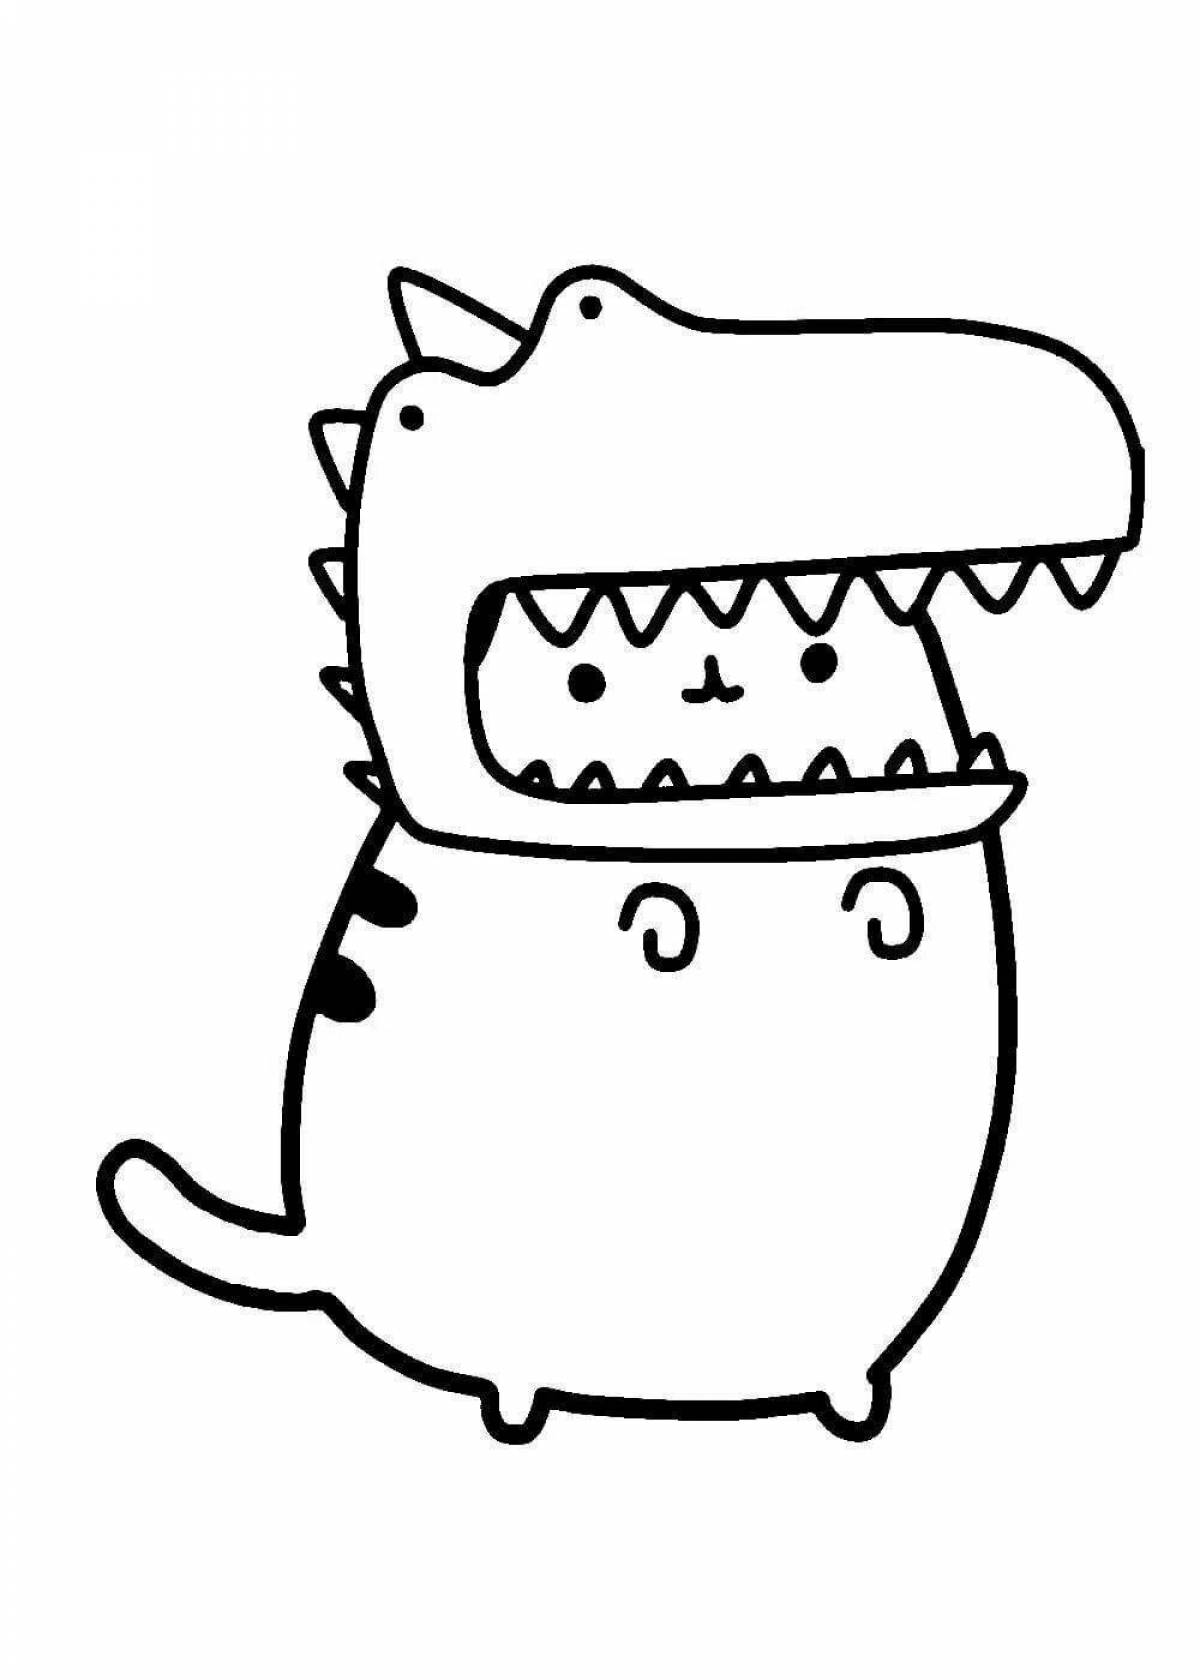 Vibrant pusheen cat coloring page for kids